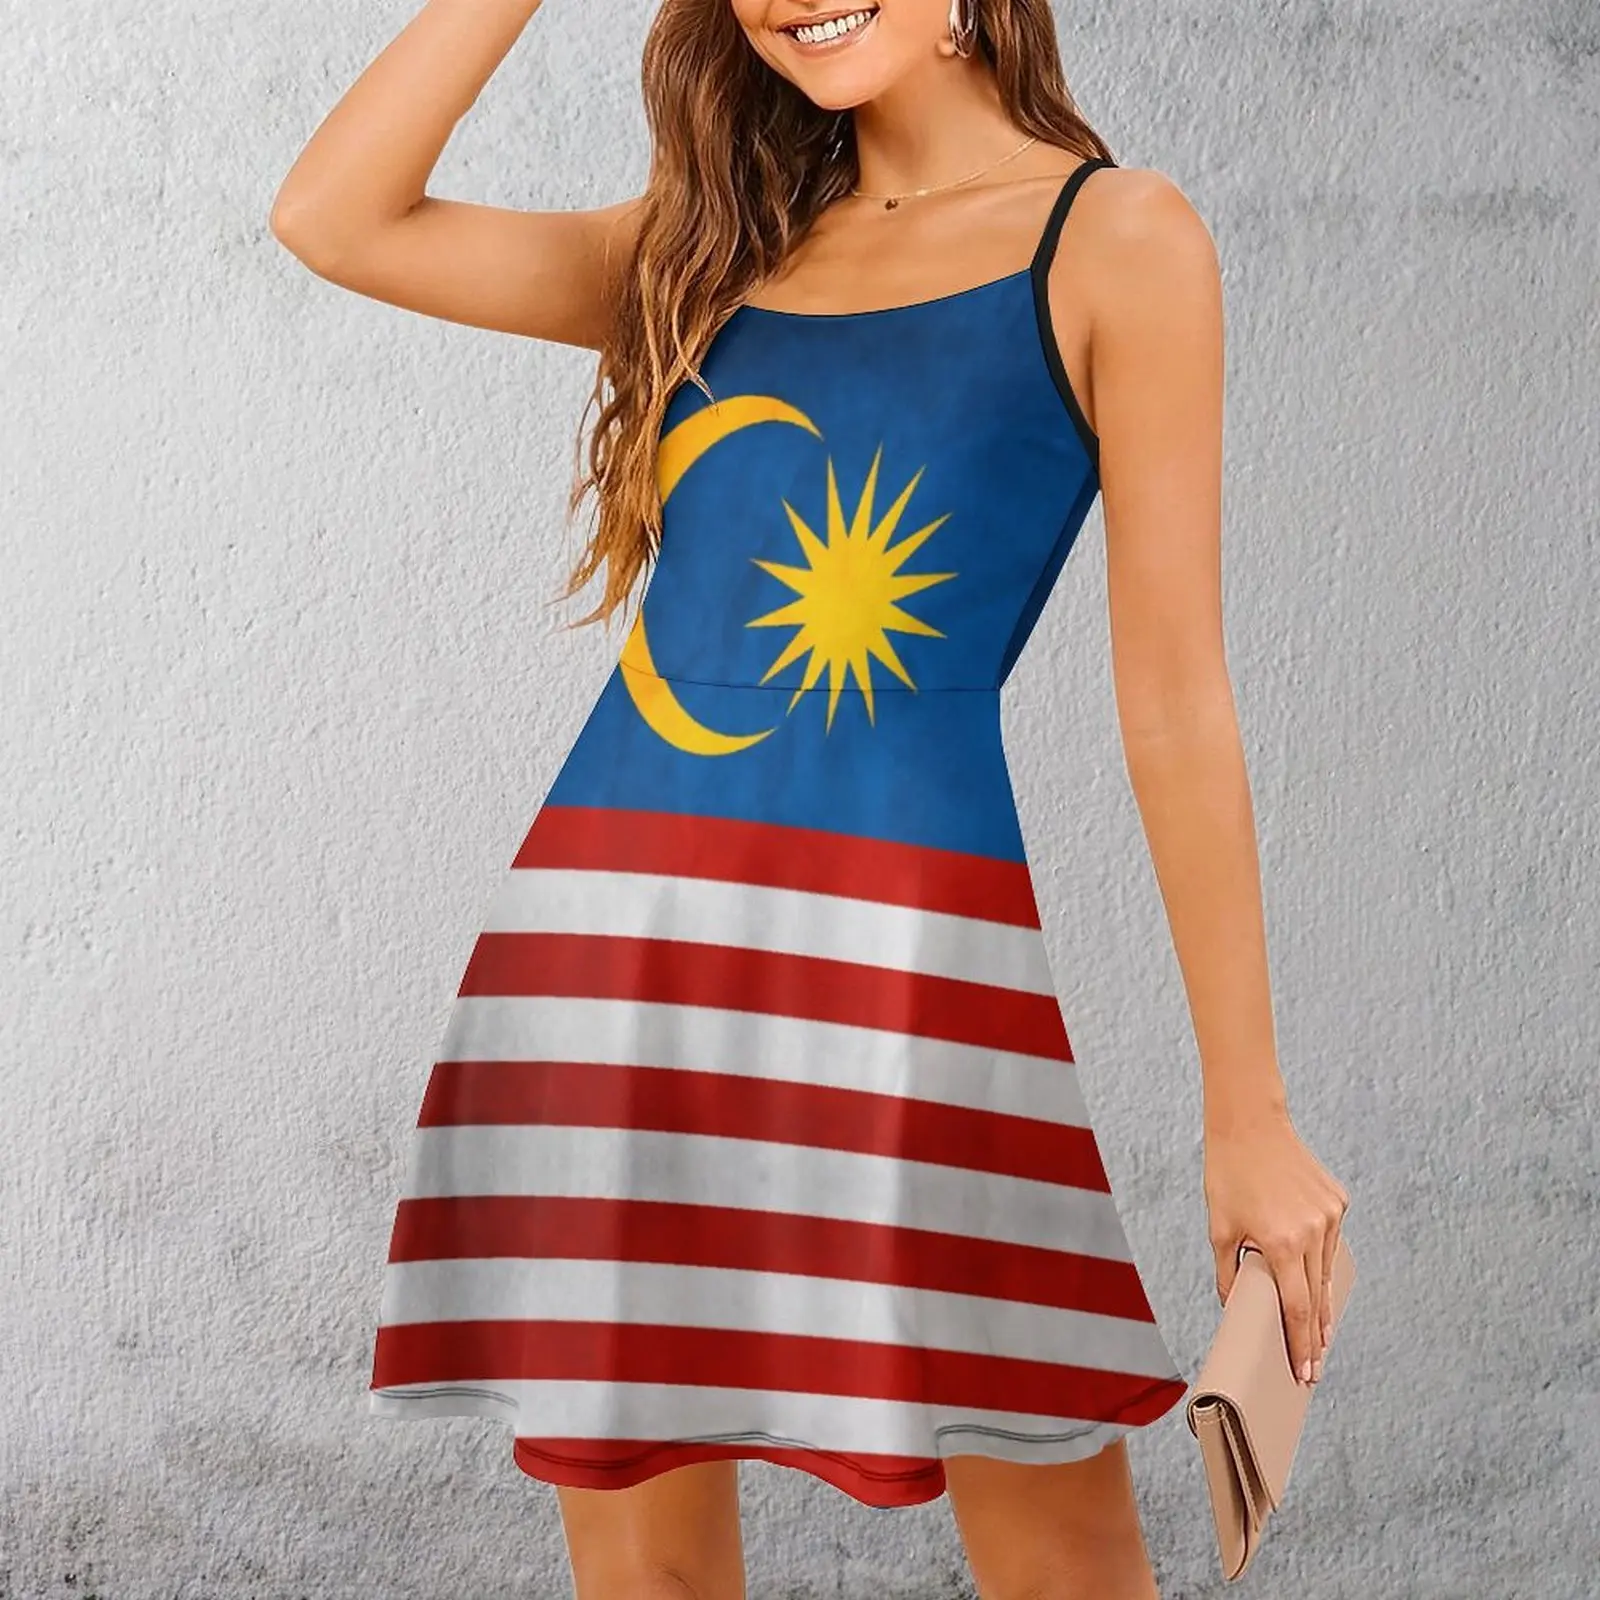 

Malaysia Malaysian Flag National Flag of Malaysia Premium Sexy Woman's Clothing Women's Sling Dress Funny Novelty Parties Str